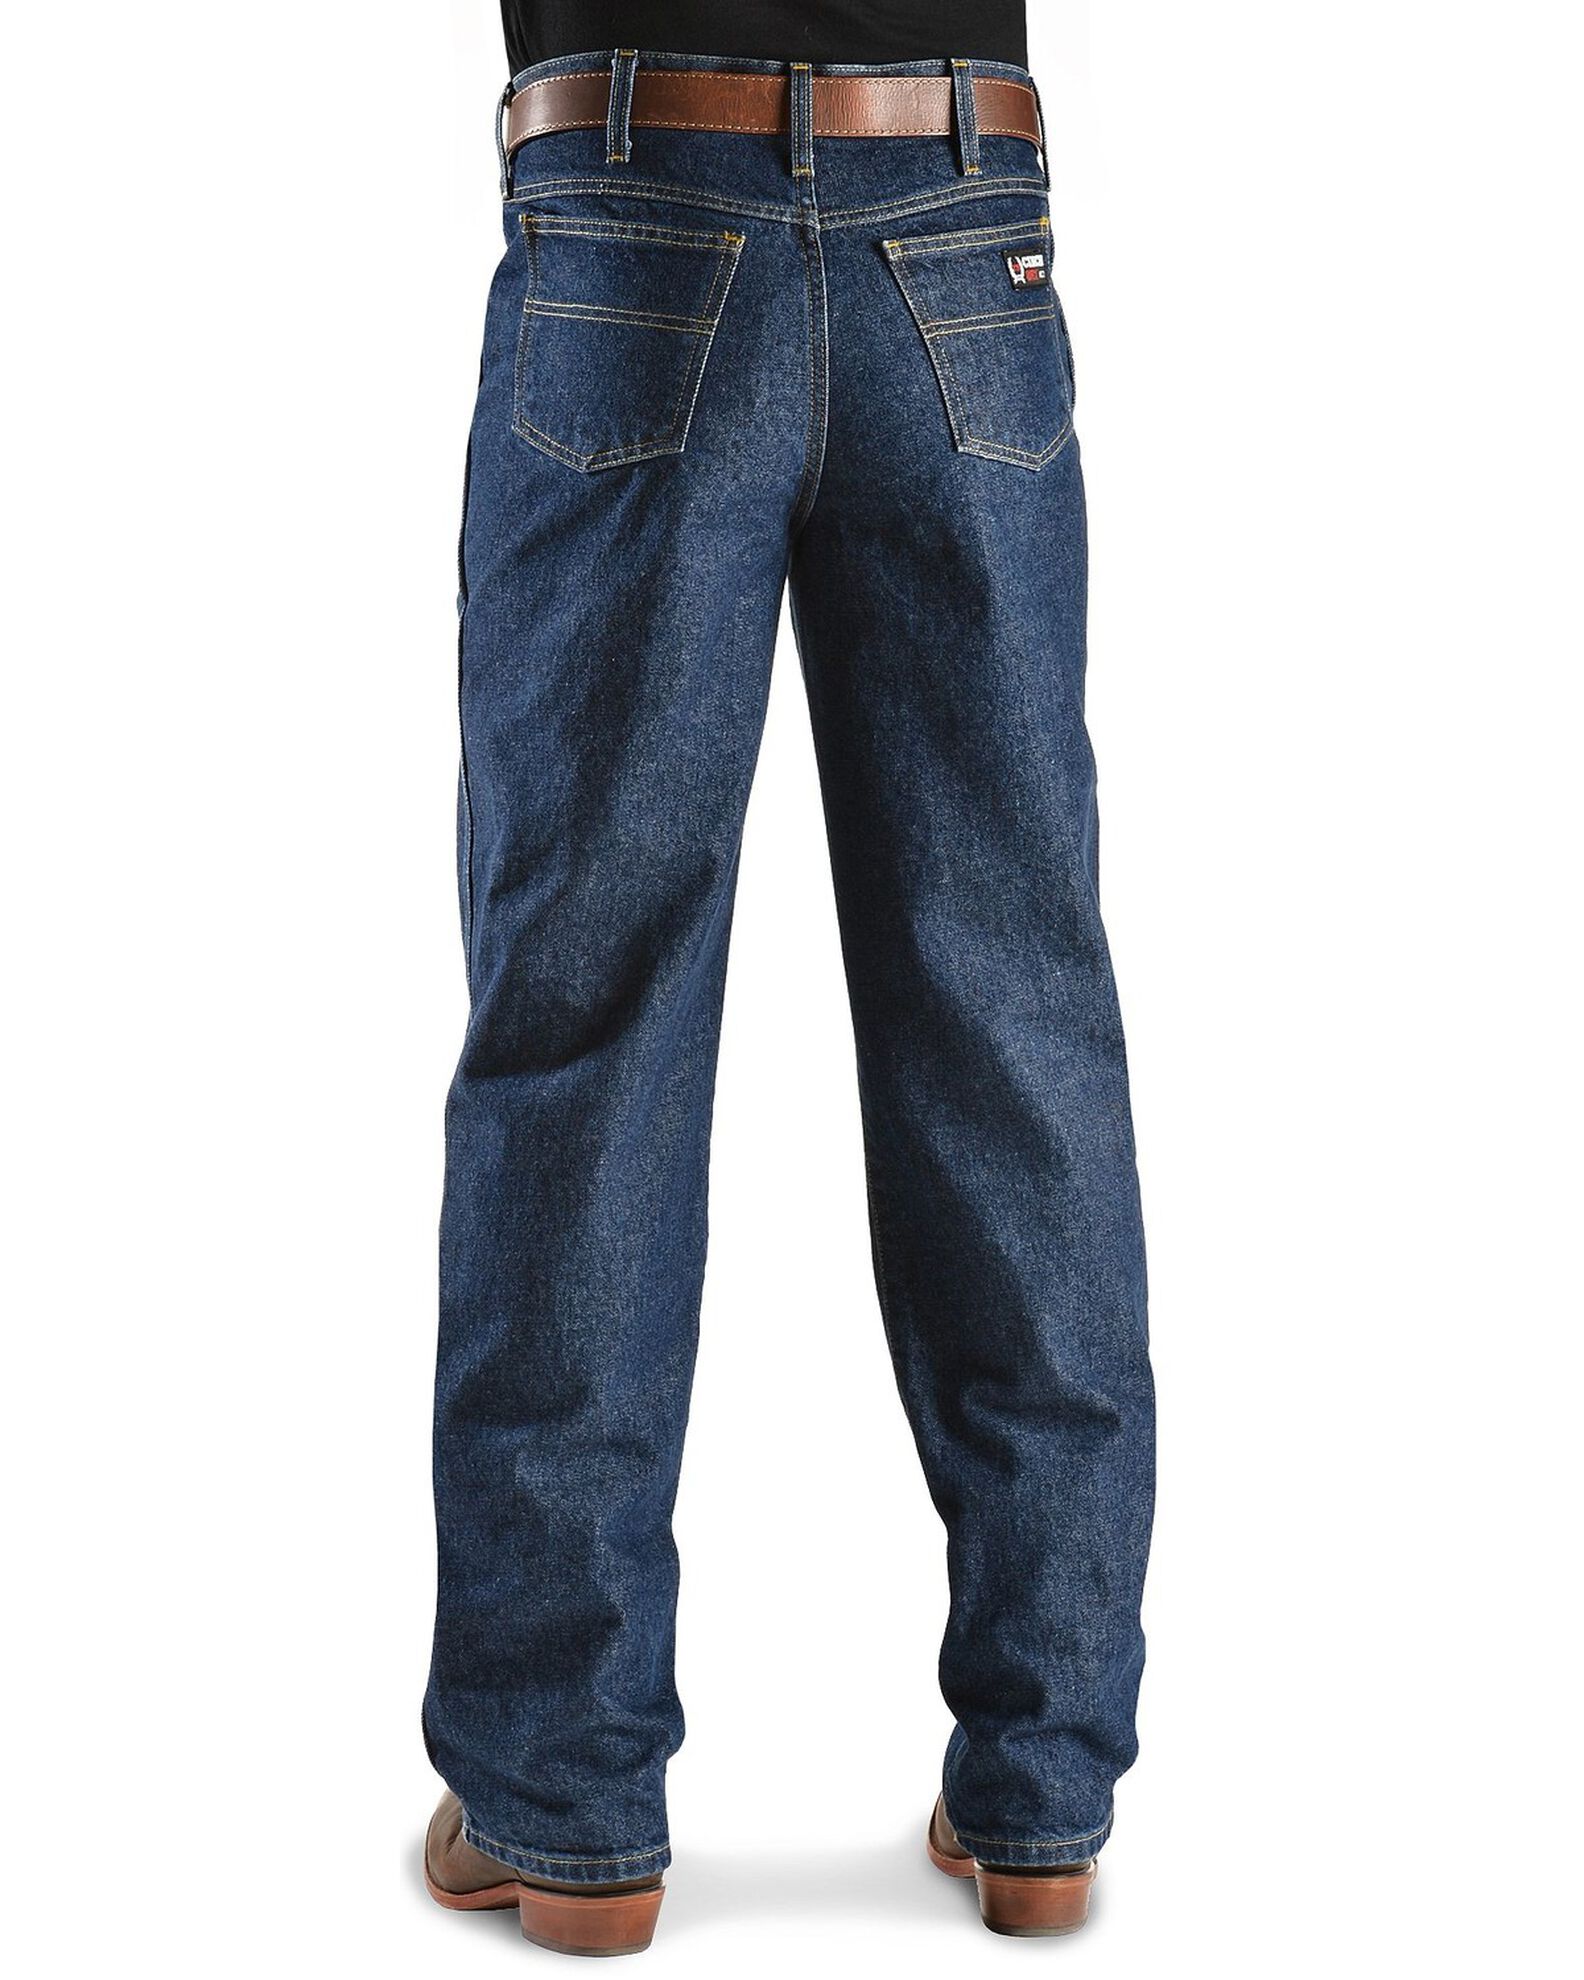 Product Name: Cinch Men's Green Label Flame-Resistant Work Jeans